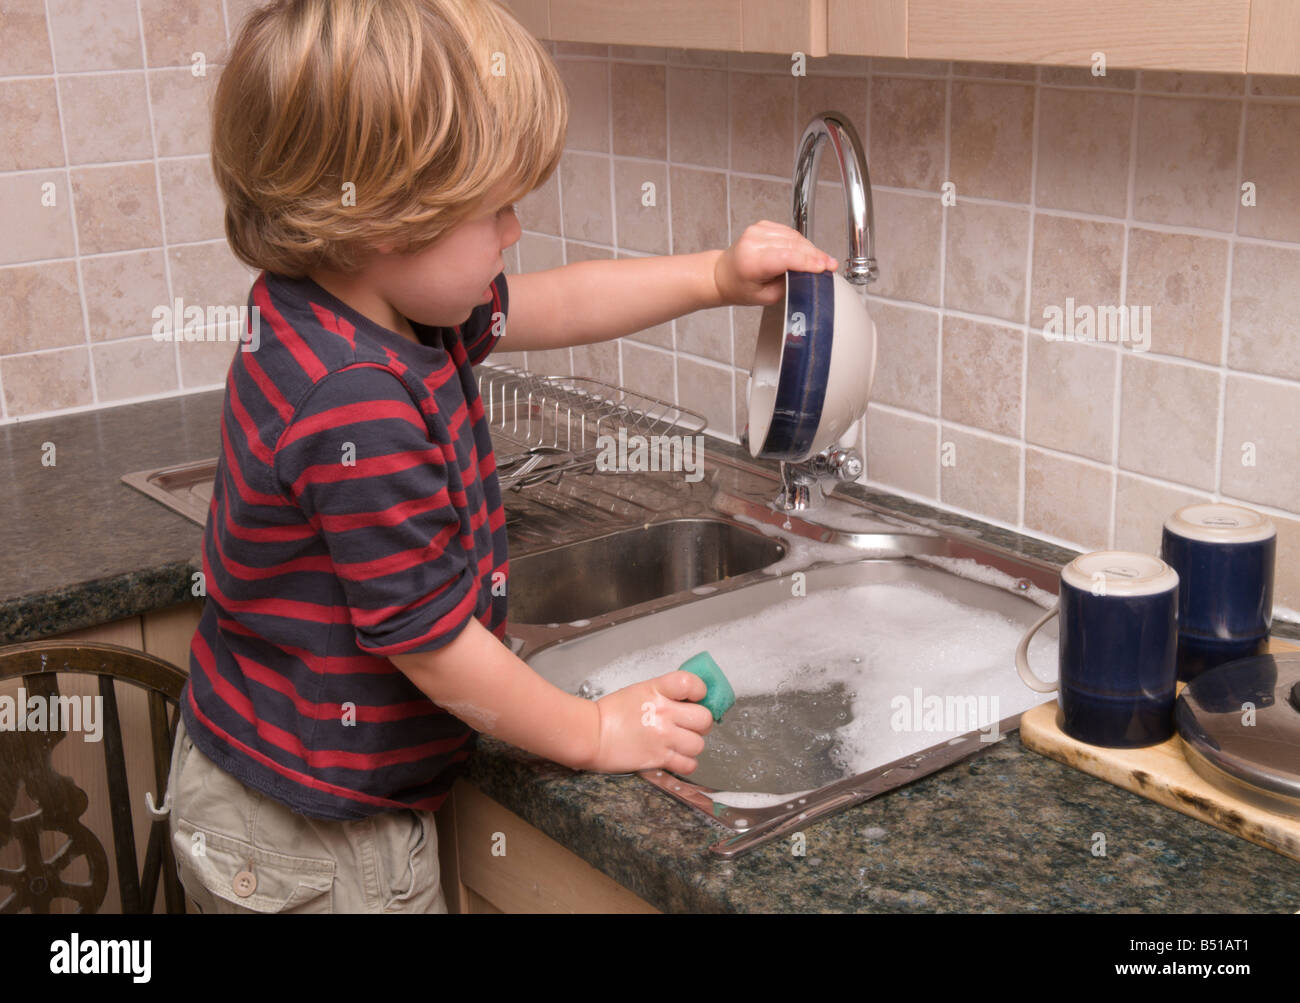 young child washing the dishes at the kitchen sink standing on a stool with the hot tap running Stock Photo